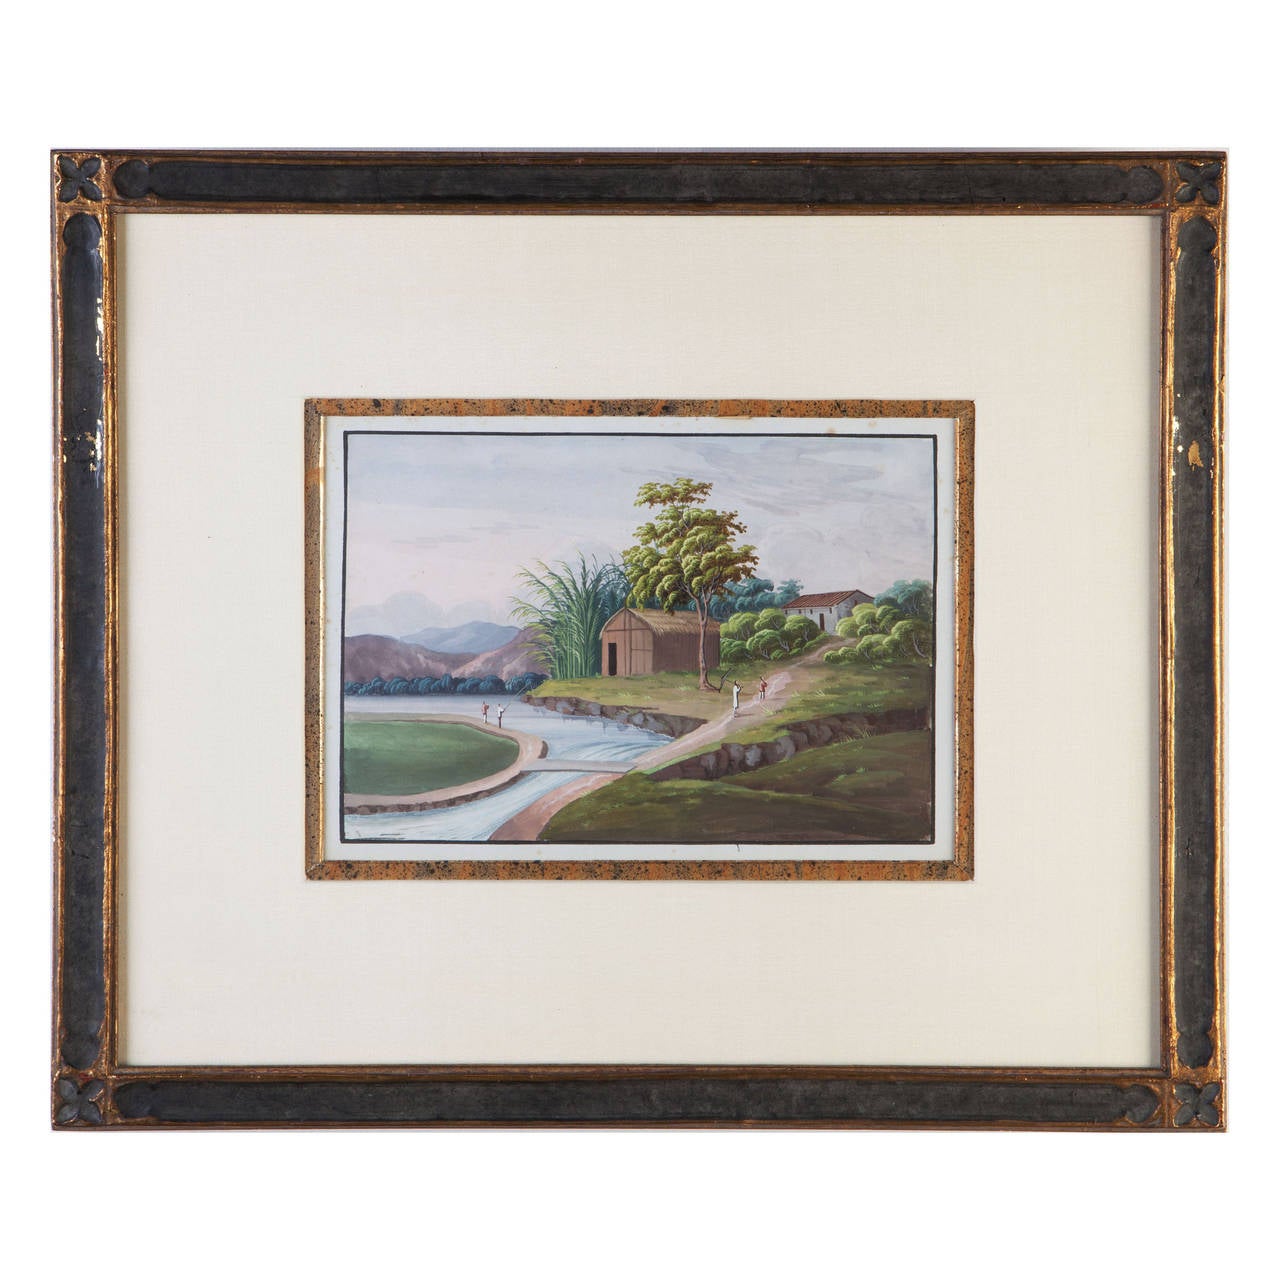 A set of nine Chinese export gouaches of local idealised landscapes, each depicting waterside architectural settings each mounted in a Gothic parcel-gilt frame, with a label from Ursus books in NY.